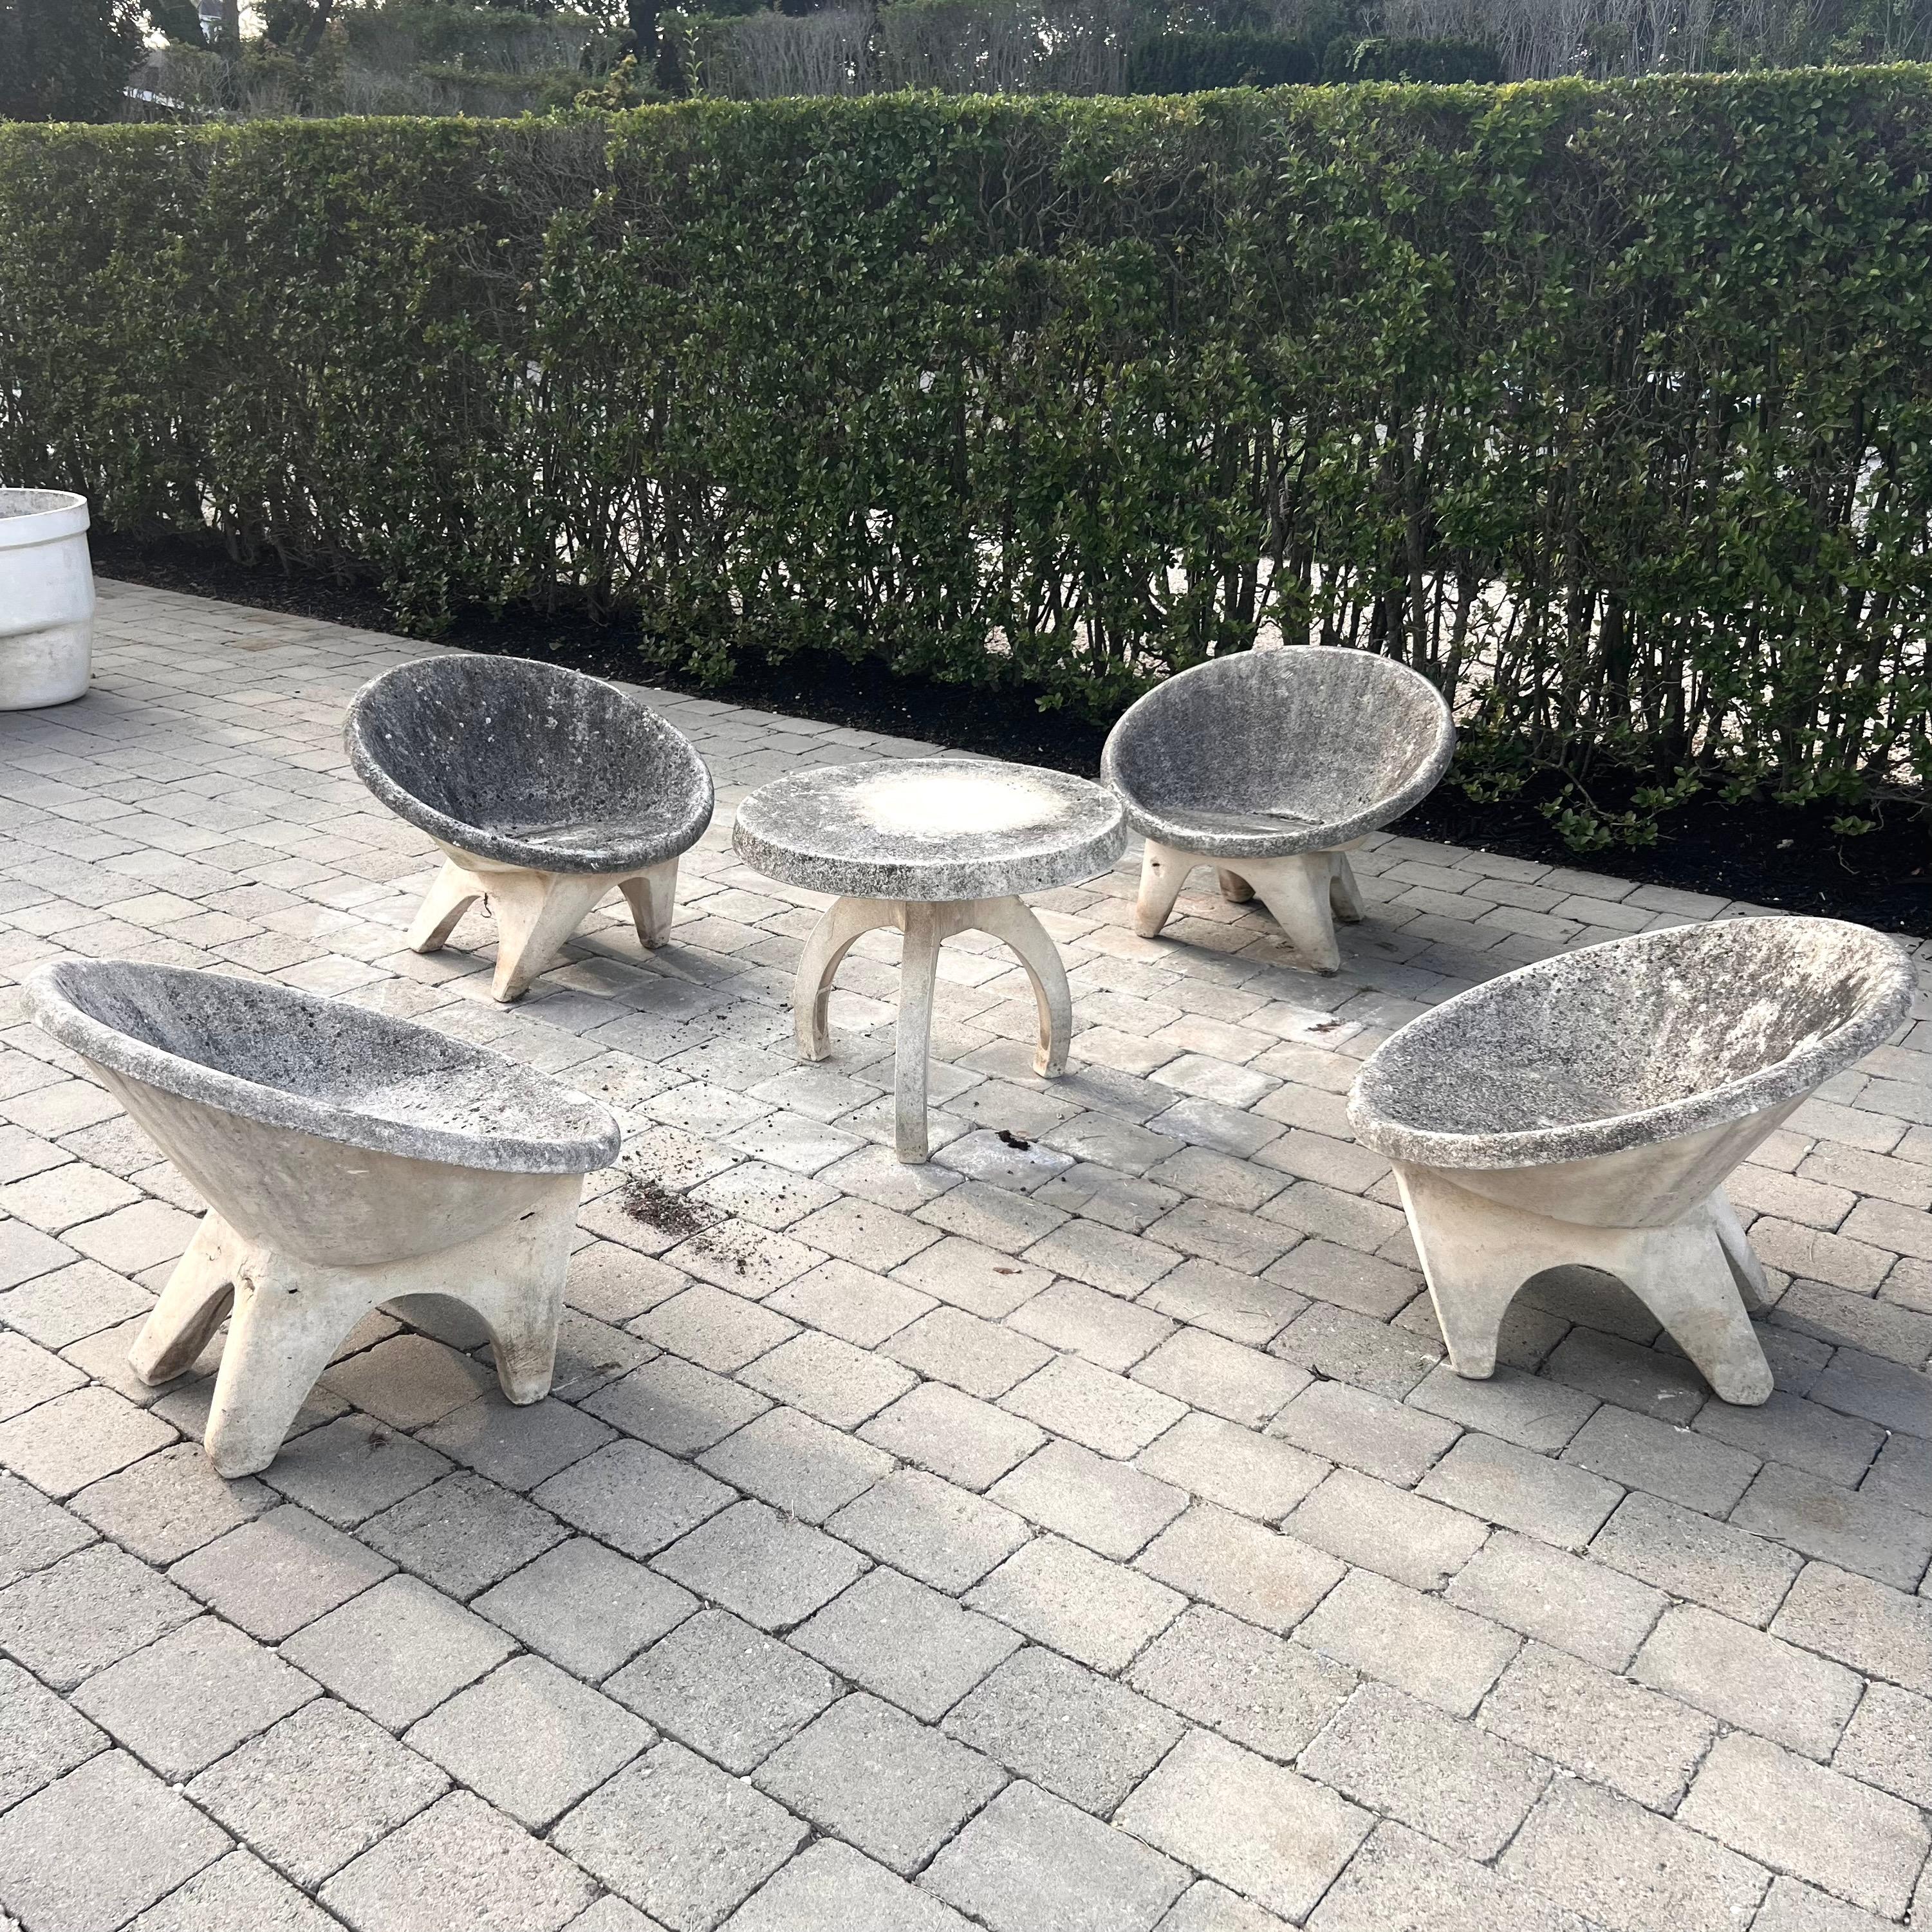 Set of 4 Sculptural Concrete Chairs and Table, 1960s Belgium For Sale 7